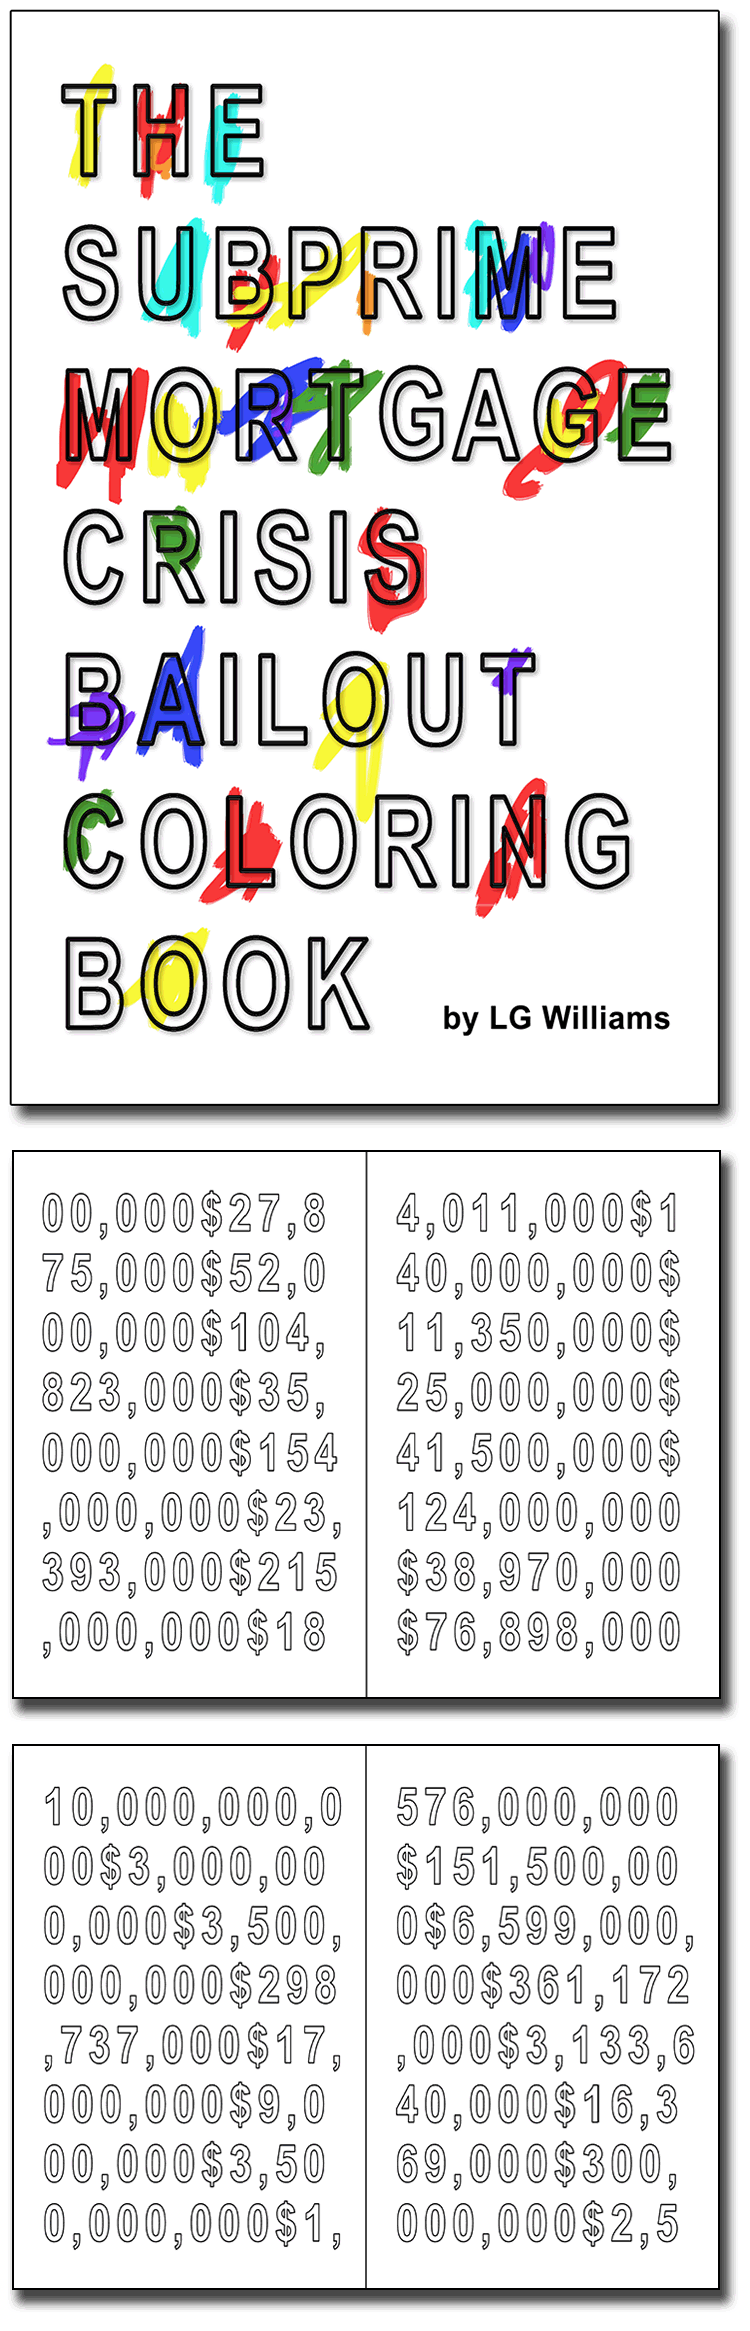 LG Williams The Subprime Mortgage Crisis Bailout Coloring Book (2013)